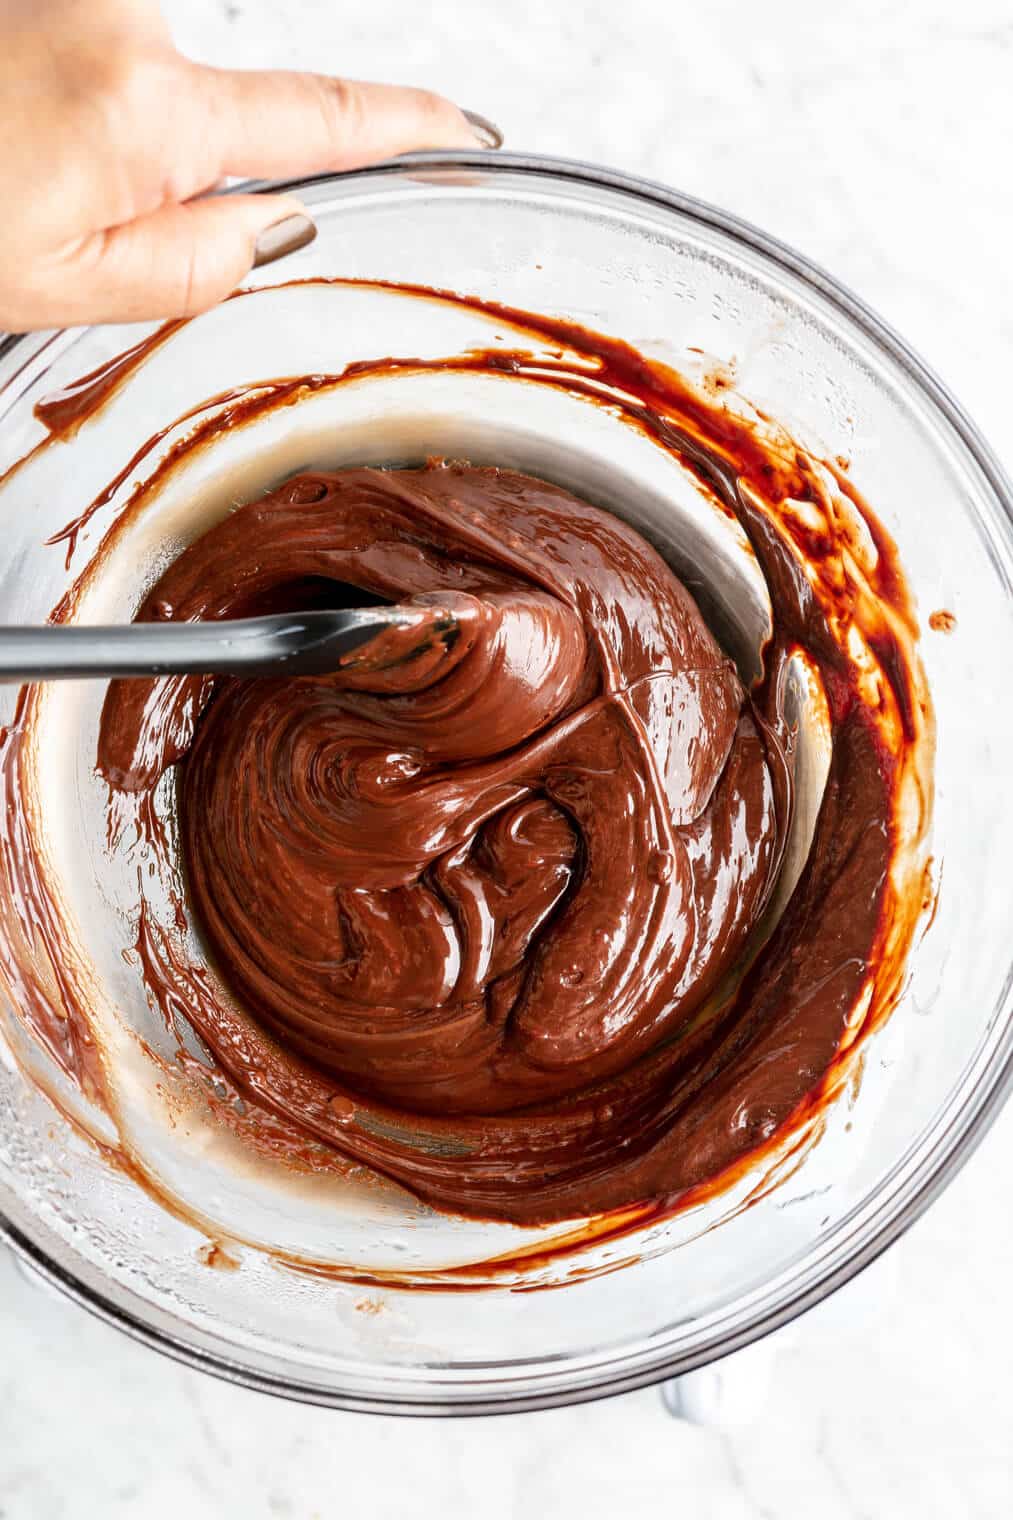 Chocolate melted in a large glass bowl bring stirred with a spatula.